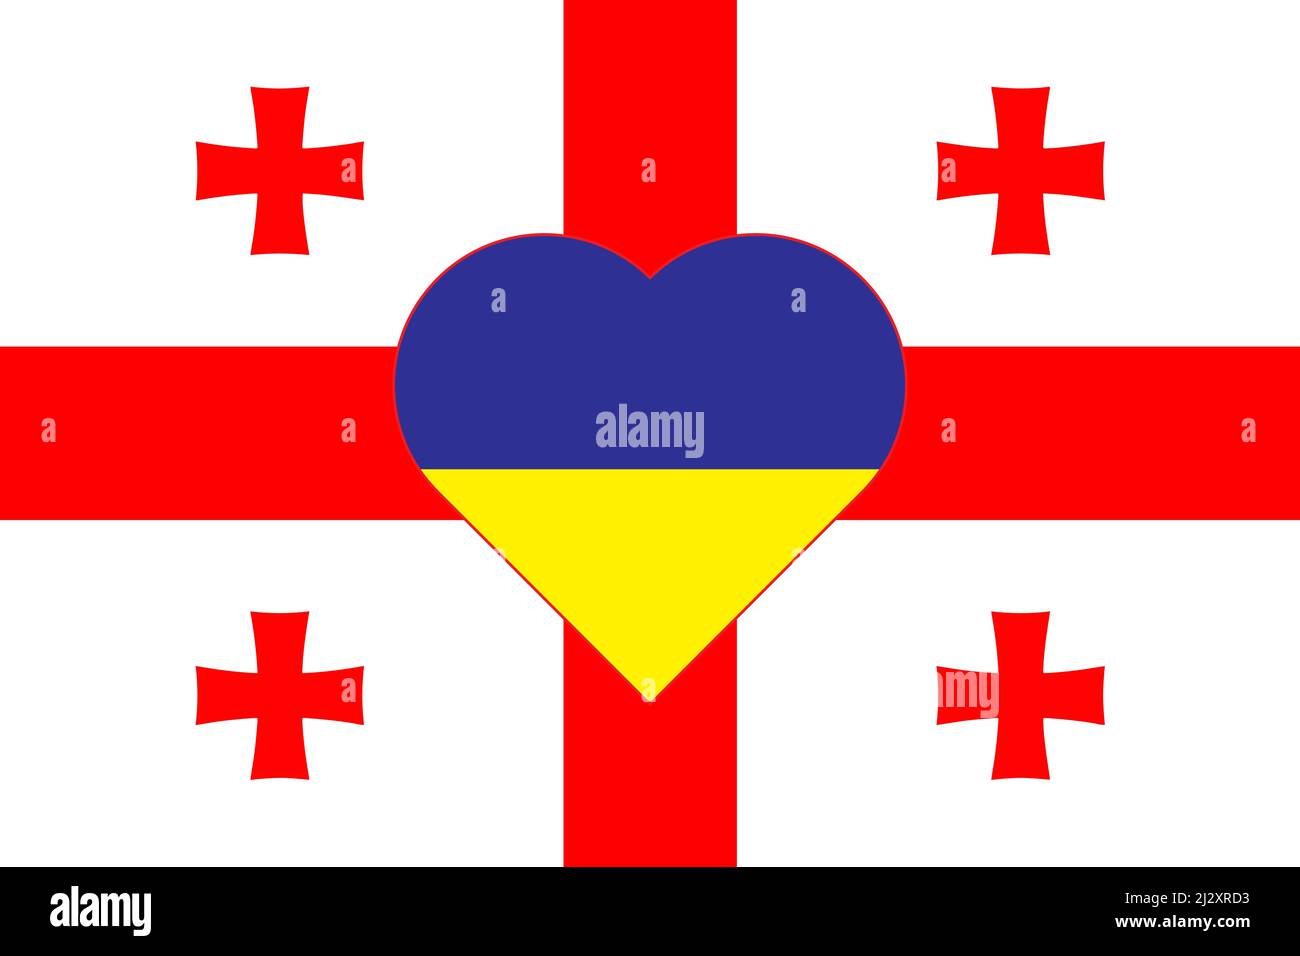 A heart painted in the colors of the flag of Ukraine on the flag of Georgia. Illustration of a blue and yellow heart on the national symbol. Stock Vector